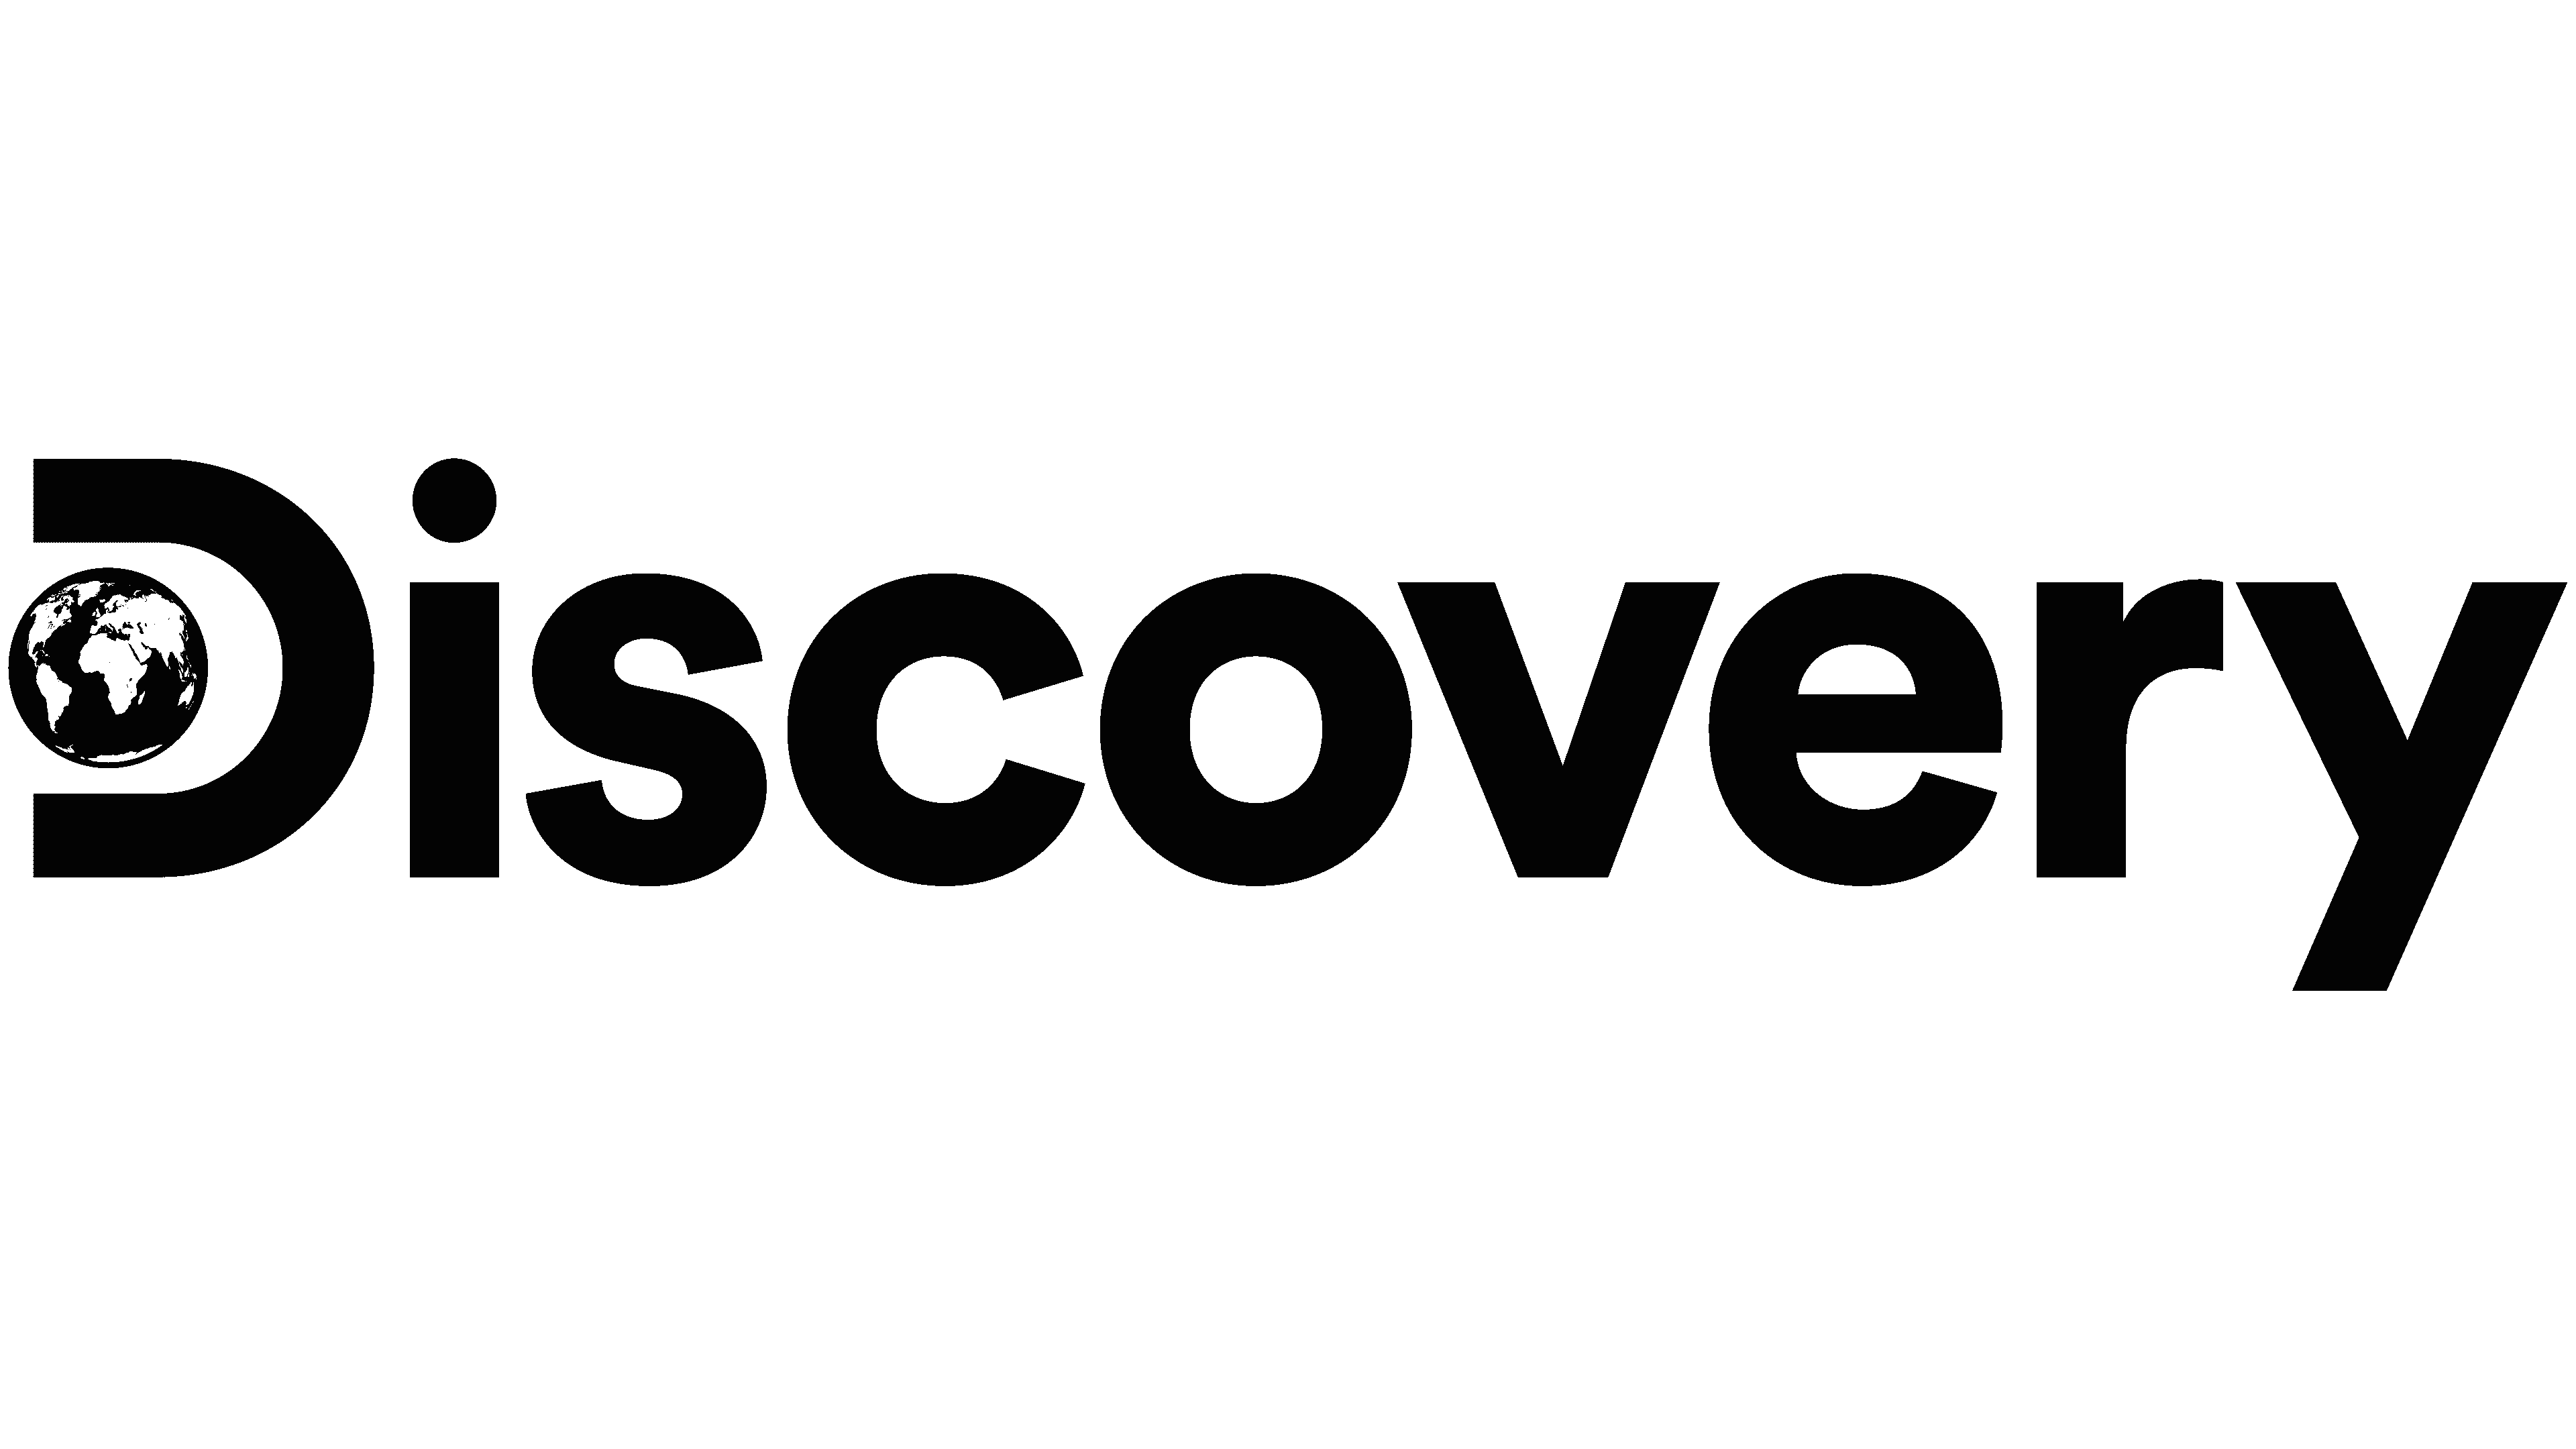 Discovery-Channel-Logo